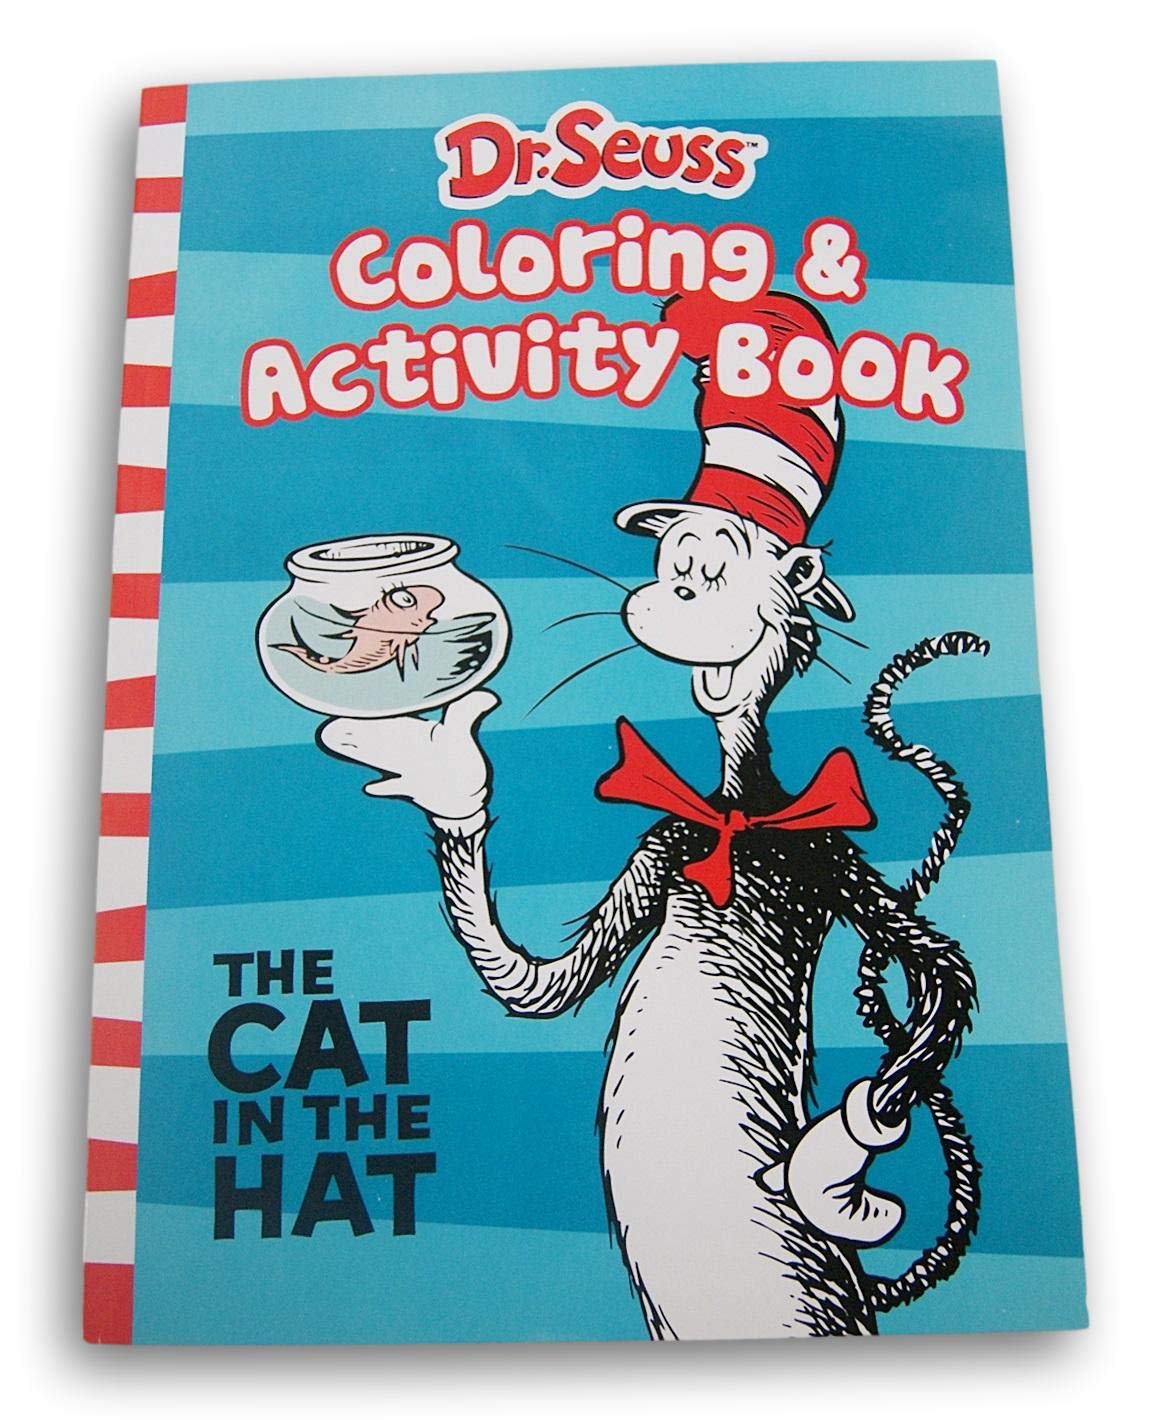 Dr seuss cat in the hat coloring and activity book